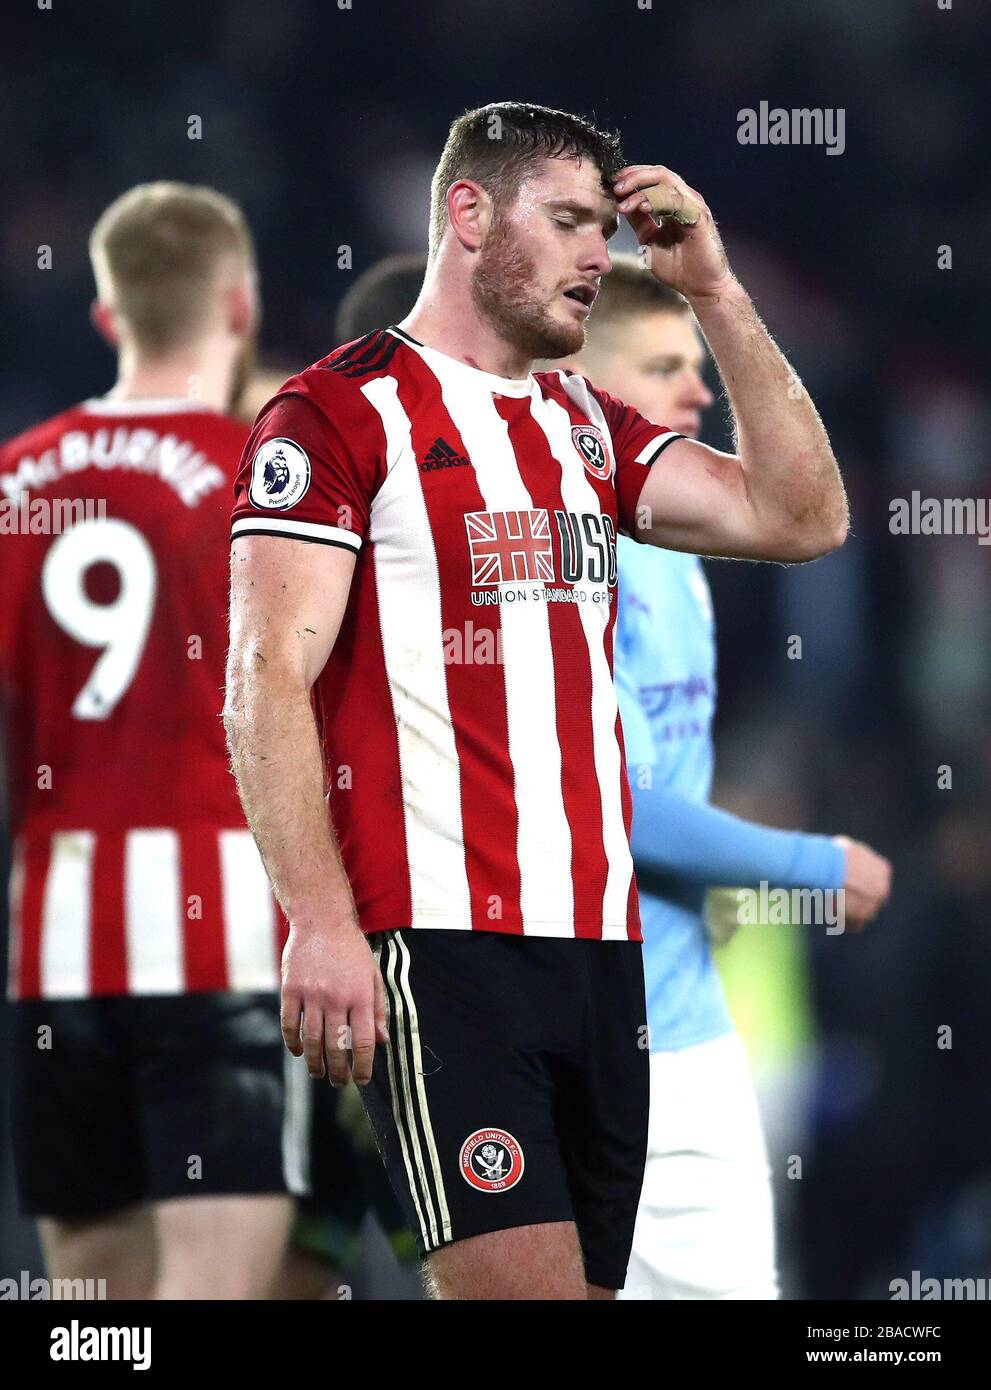 Sheffield United's Jack O'Connell appears dejected after the final whistle Stock Photo